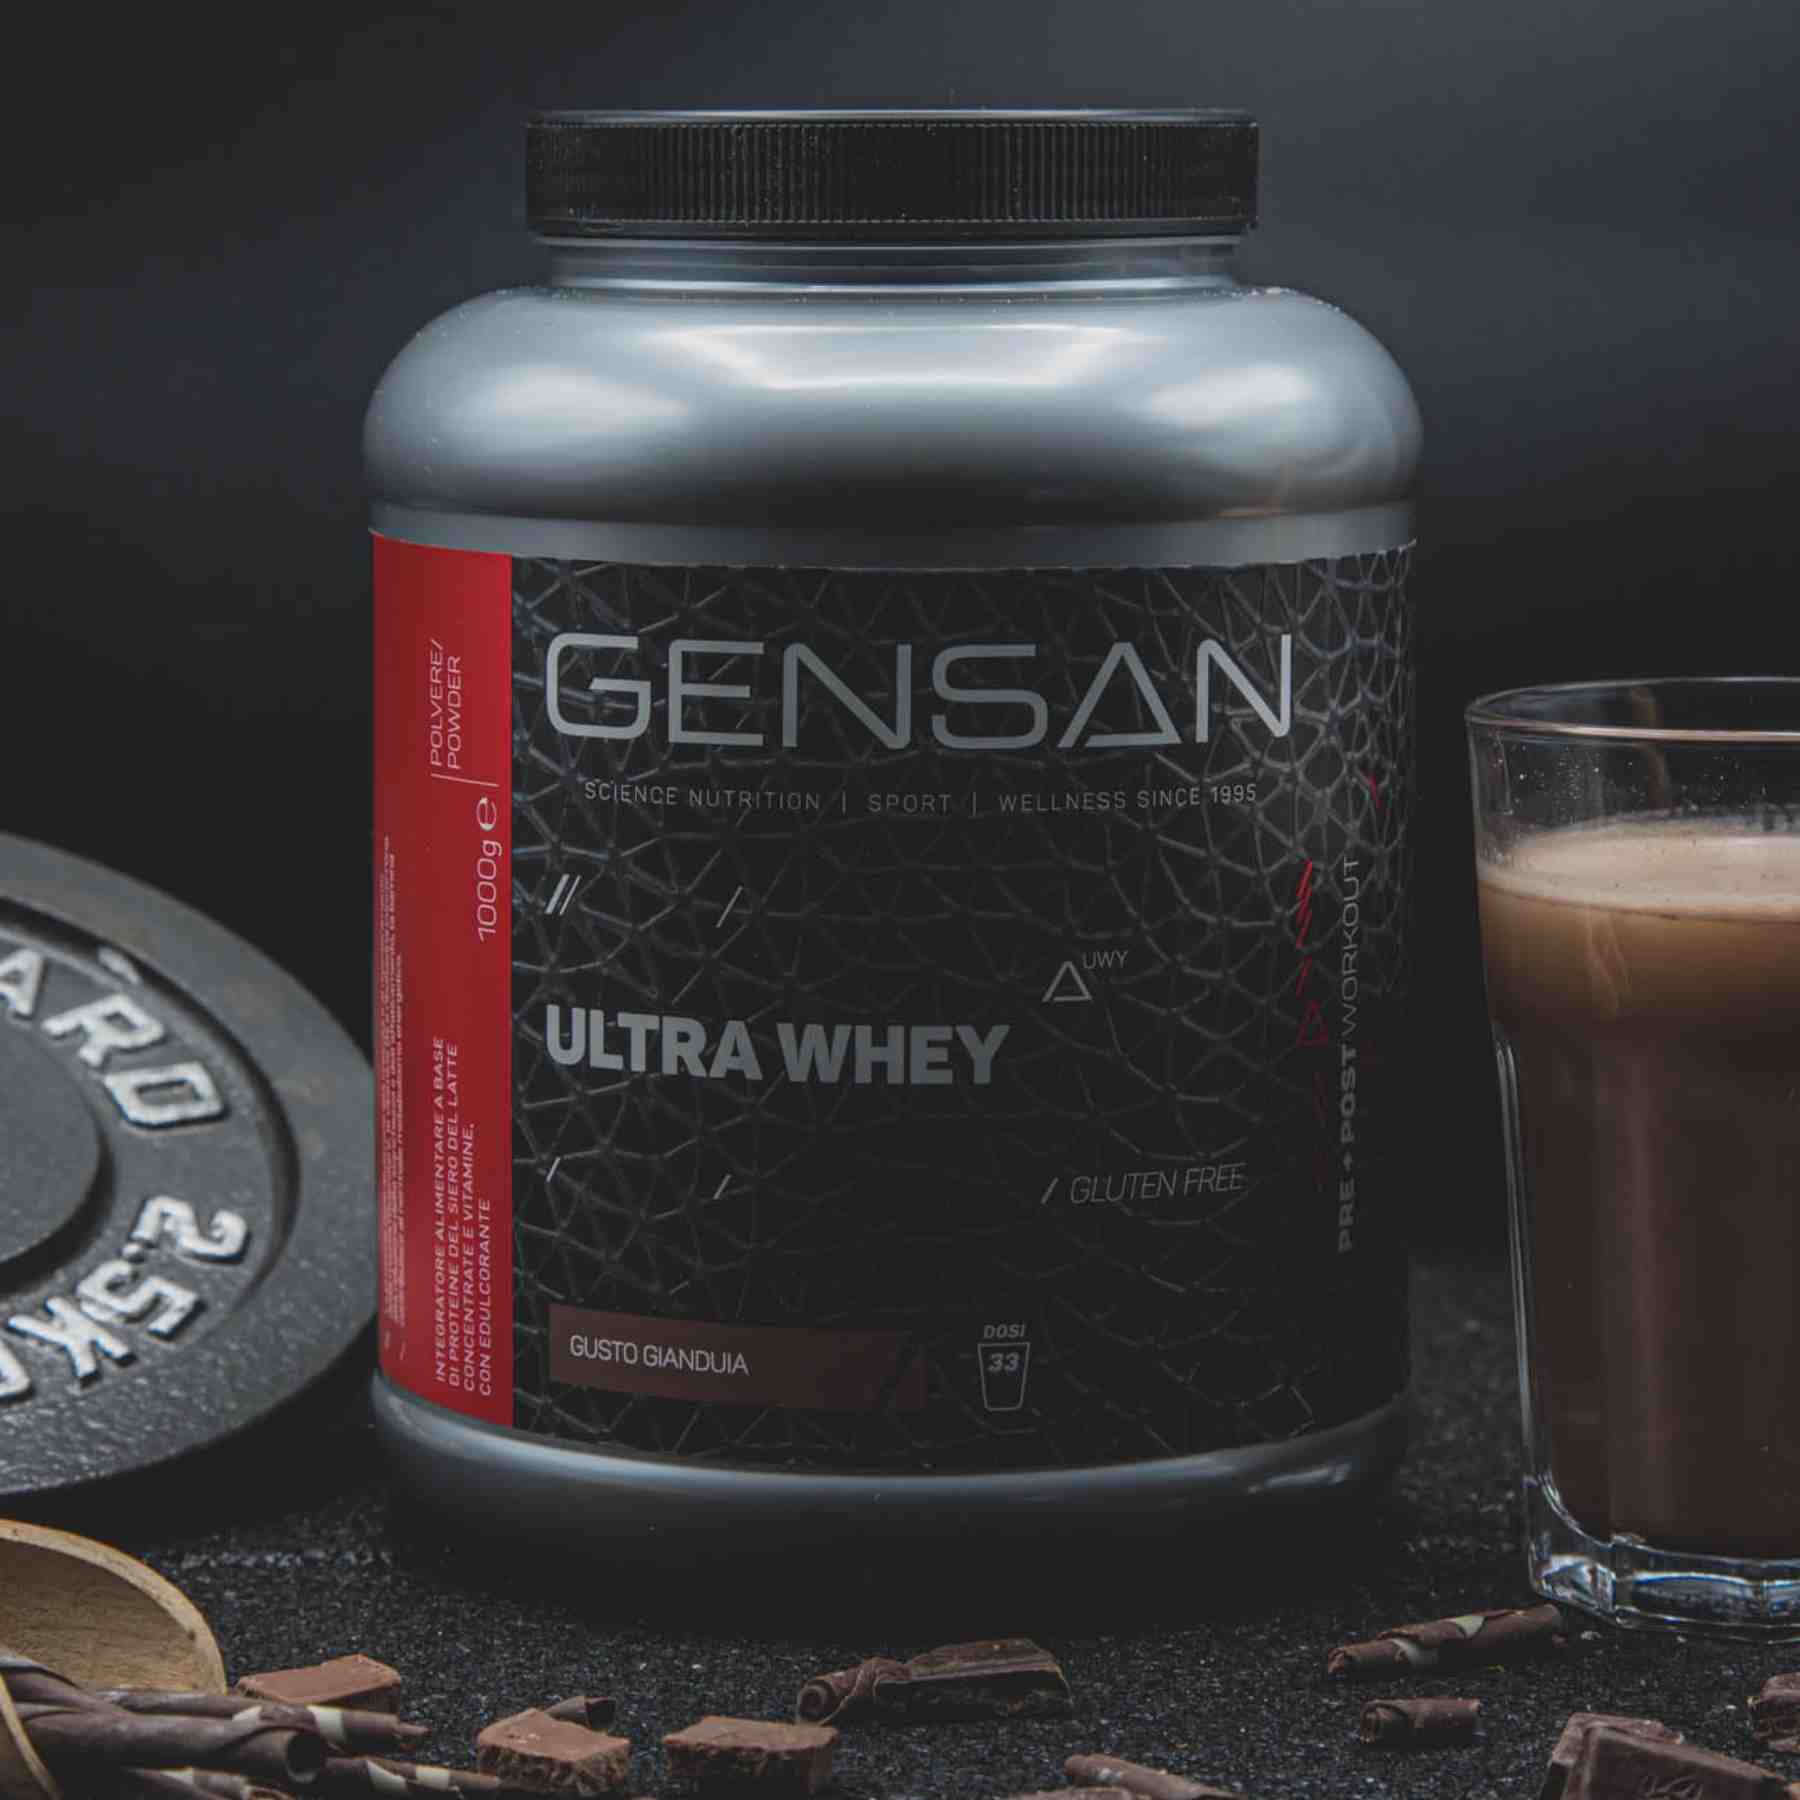 whey protein in polvere ULTRA WHEY gensan